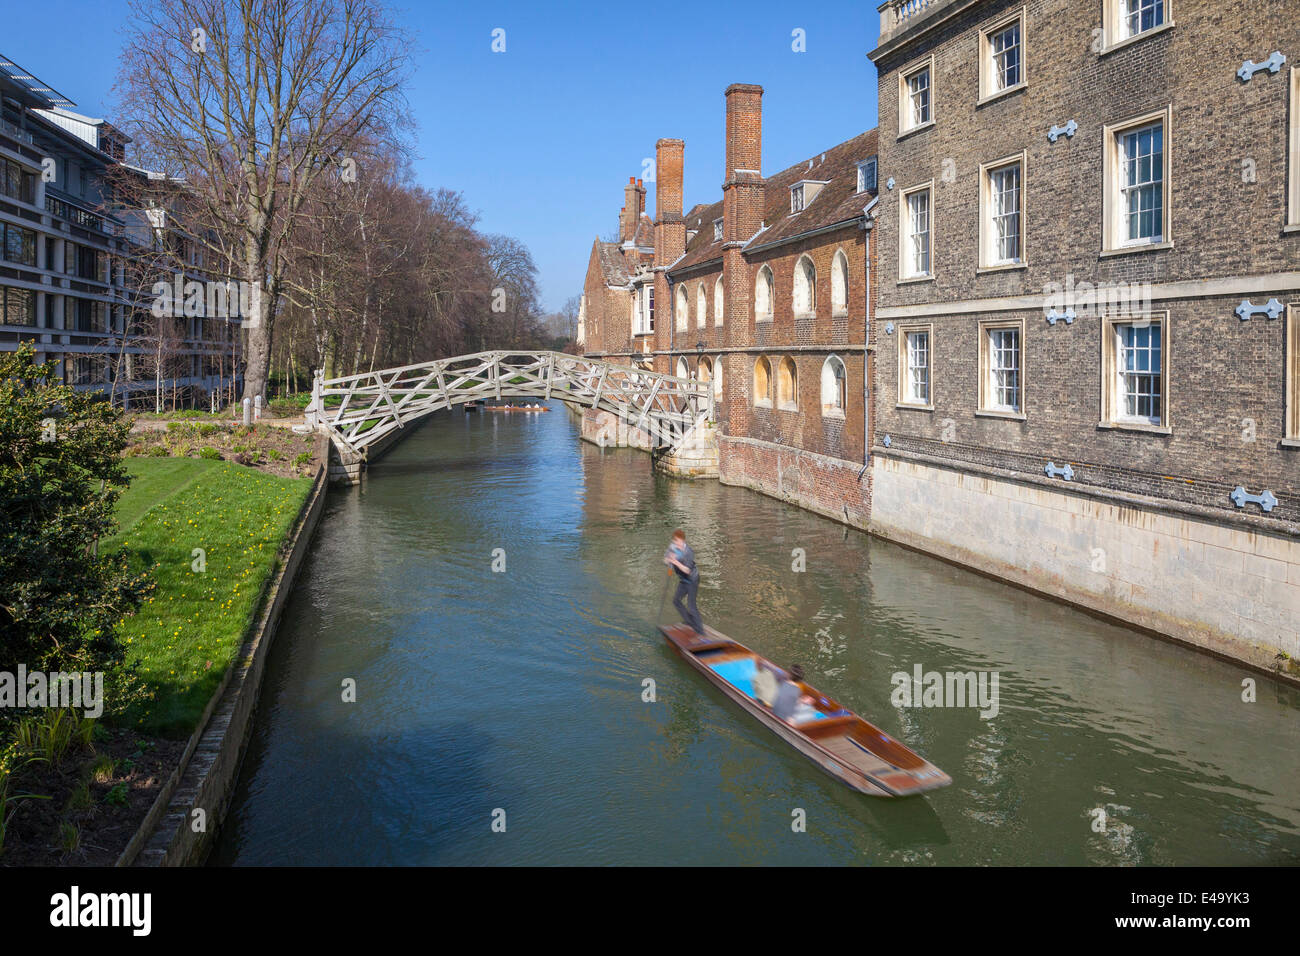 Mathematical Bridge, connecting two parts of Queens College, with punters on the river, Cambridge, England, United Kingdom Stock Photo